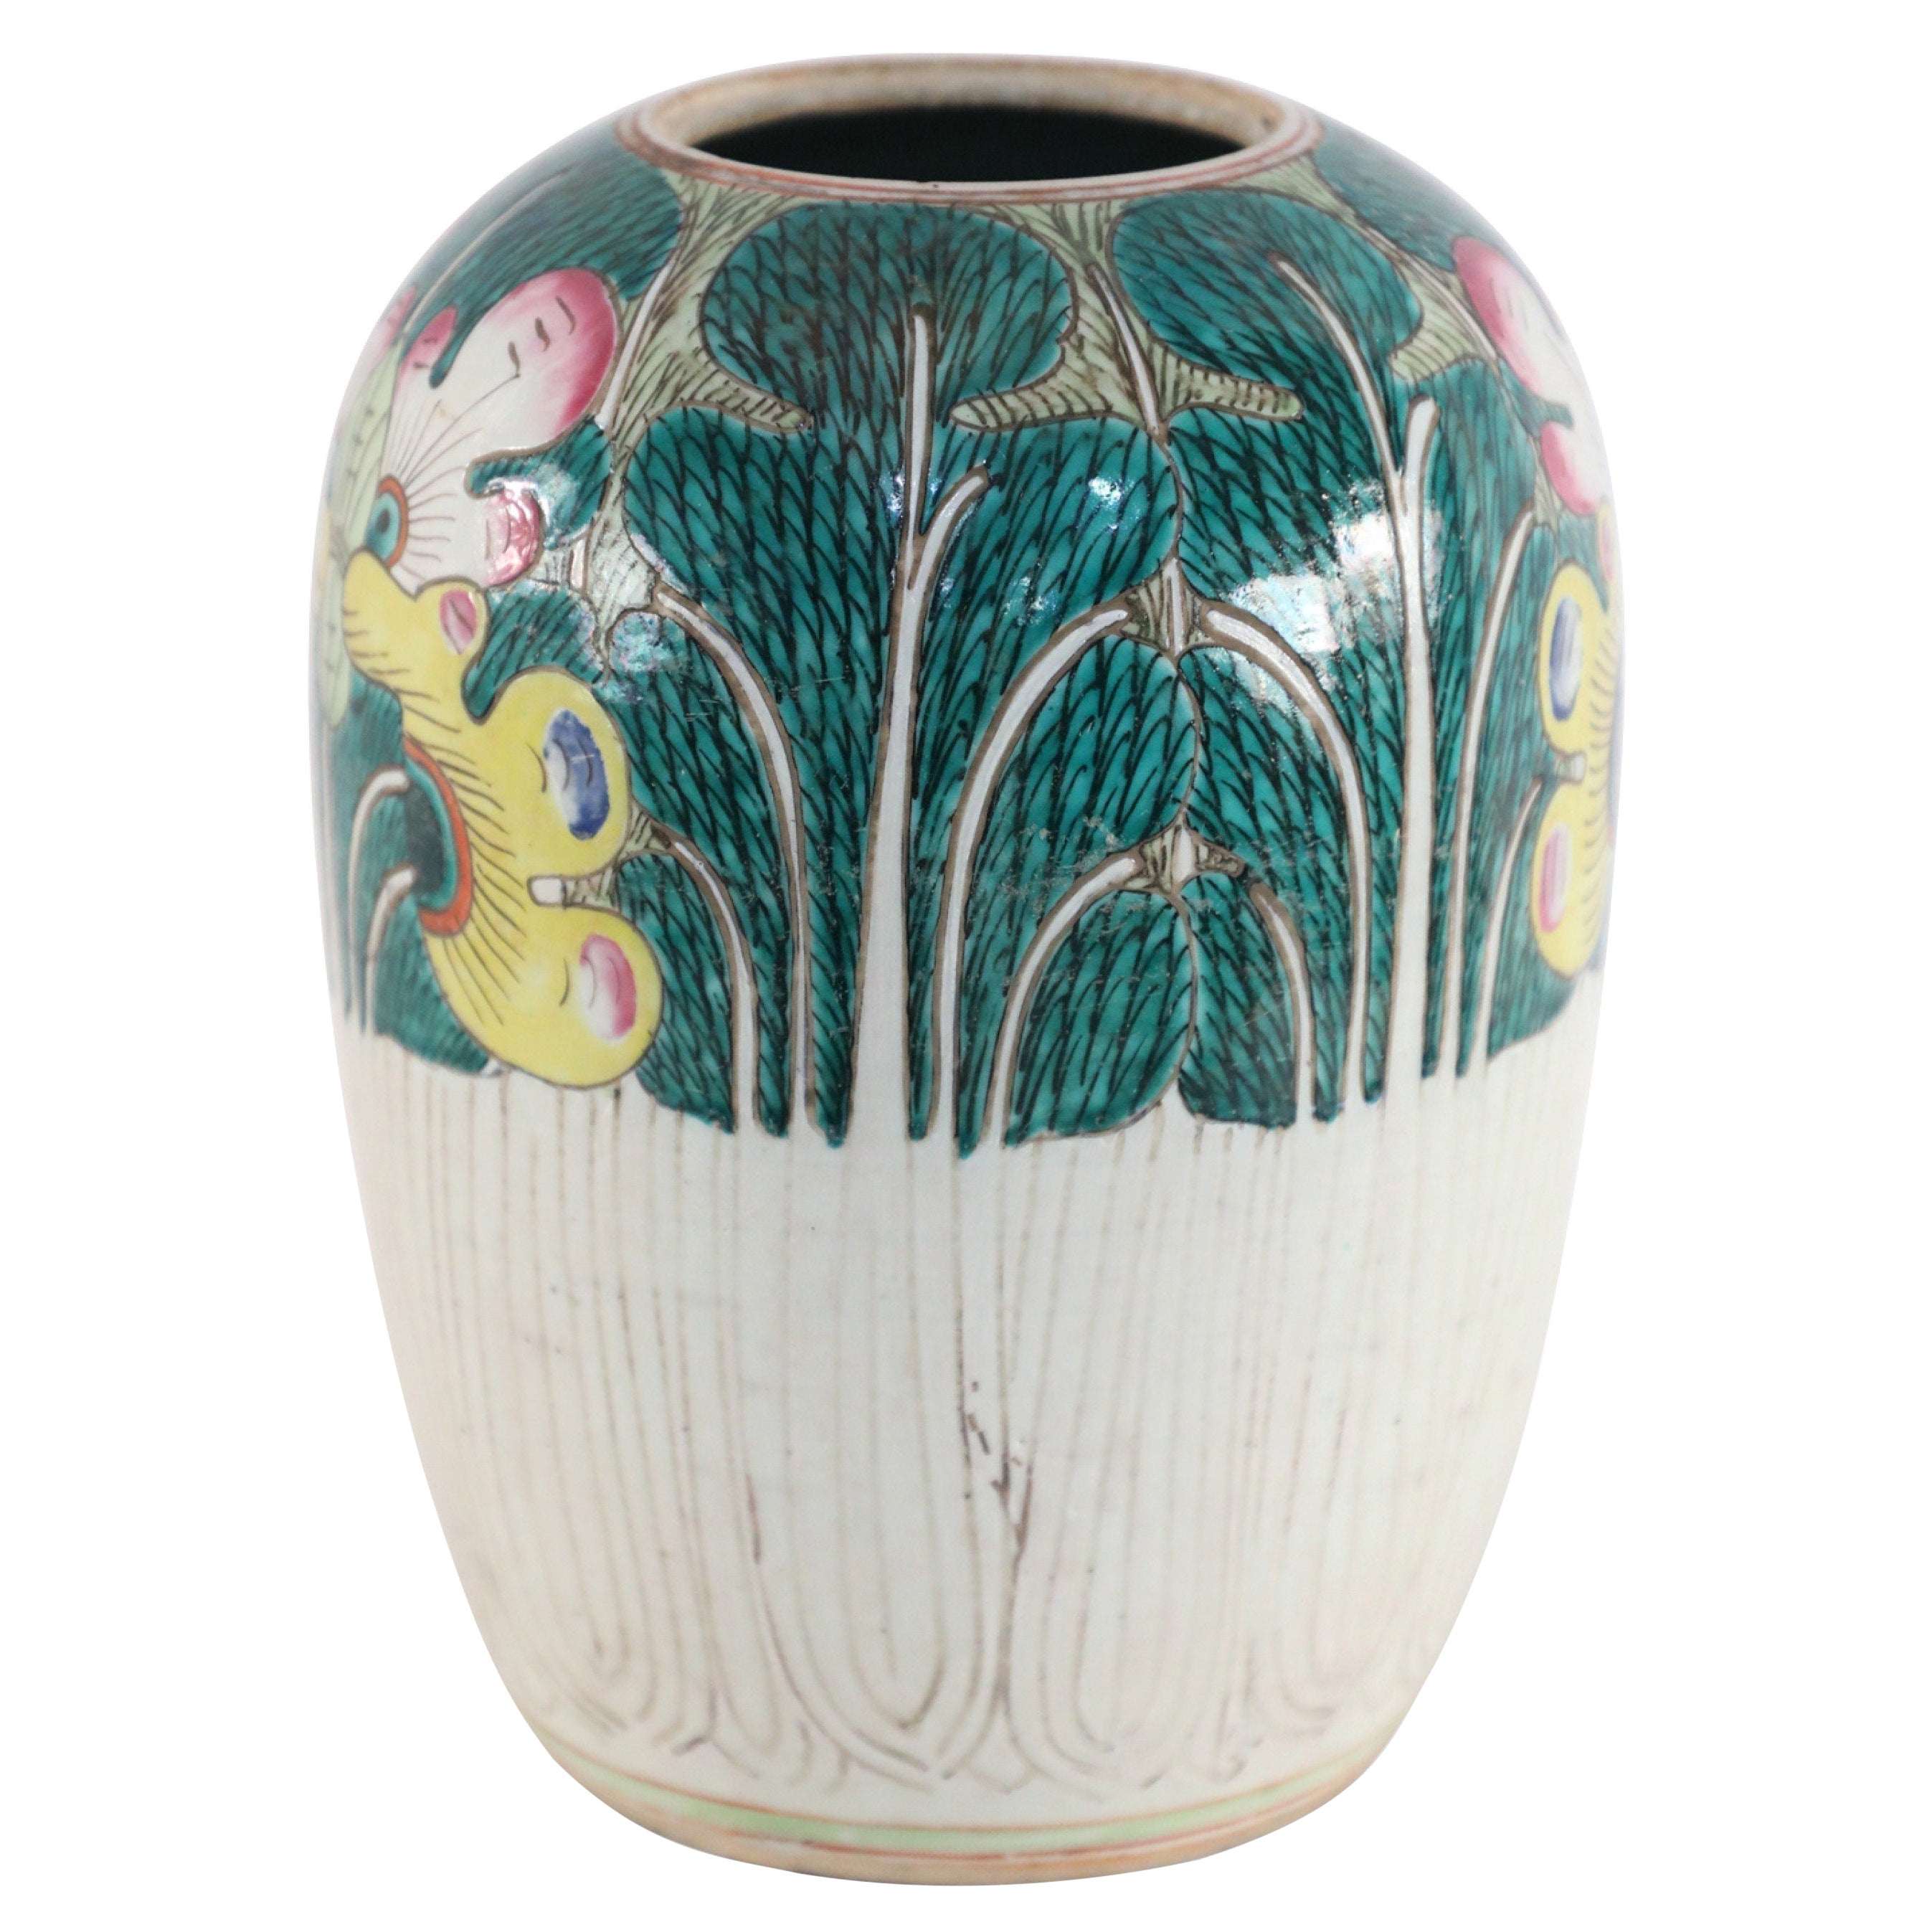 Chinese White Green and Yellow Vegetal Winter Melon Porcelain Vase